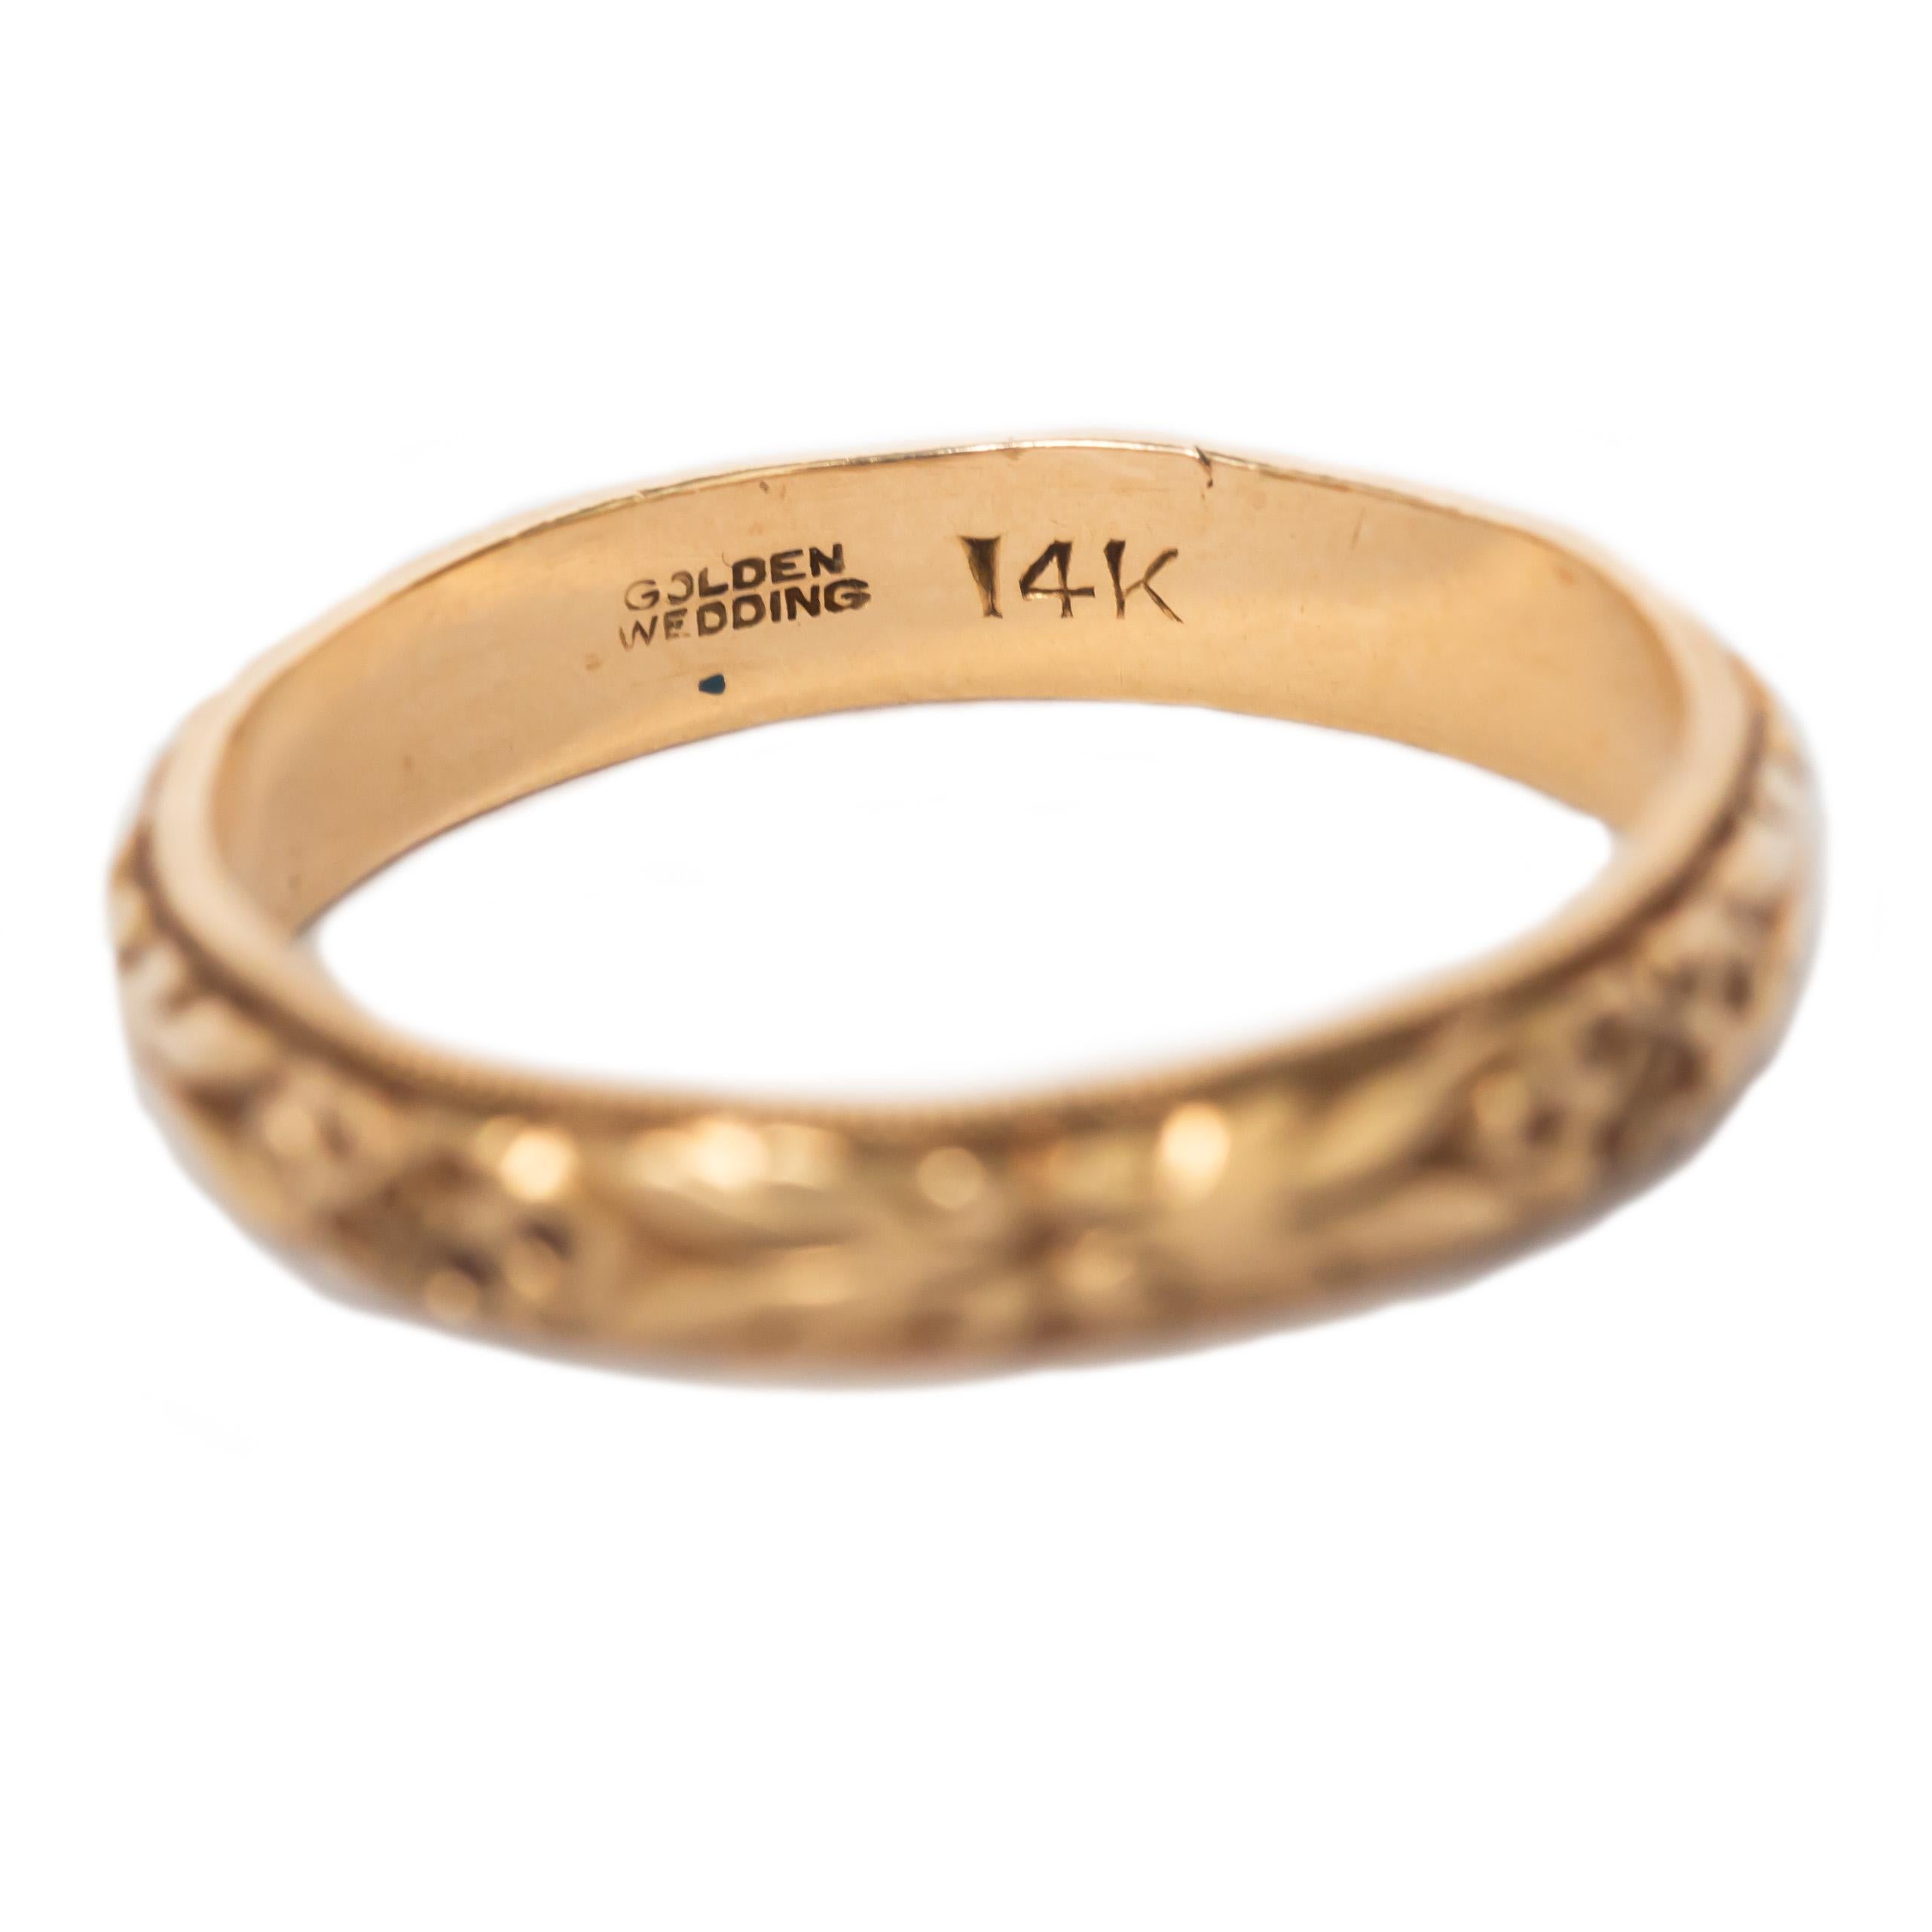 Ring Size: 9.5
Metal Type: 14 karat Yellow Gold
Weight: 3.7 grams

Finger to Top of Stone Measurement: 1.55mm
Width: 3.95mm